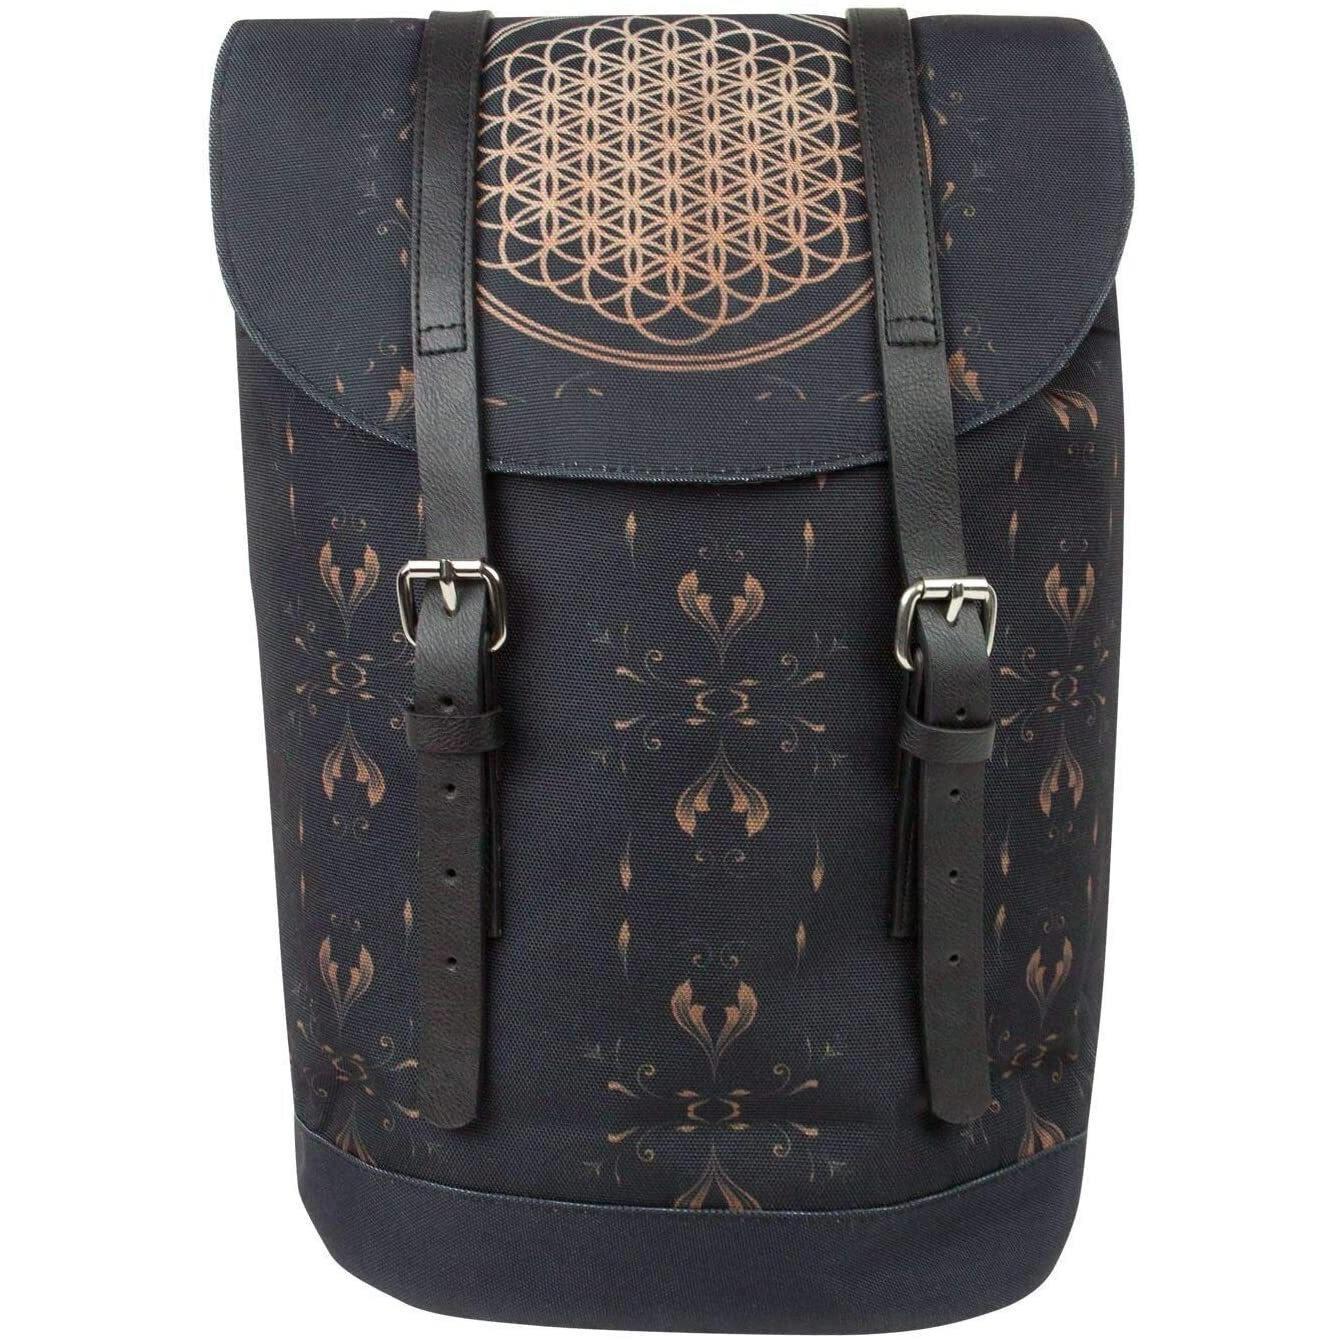 Rock Sax Heritage Bring Me The Horizon Backpack (Black) (One Size)